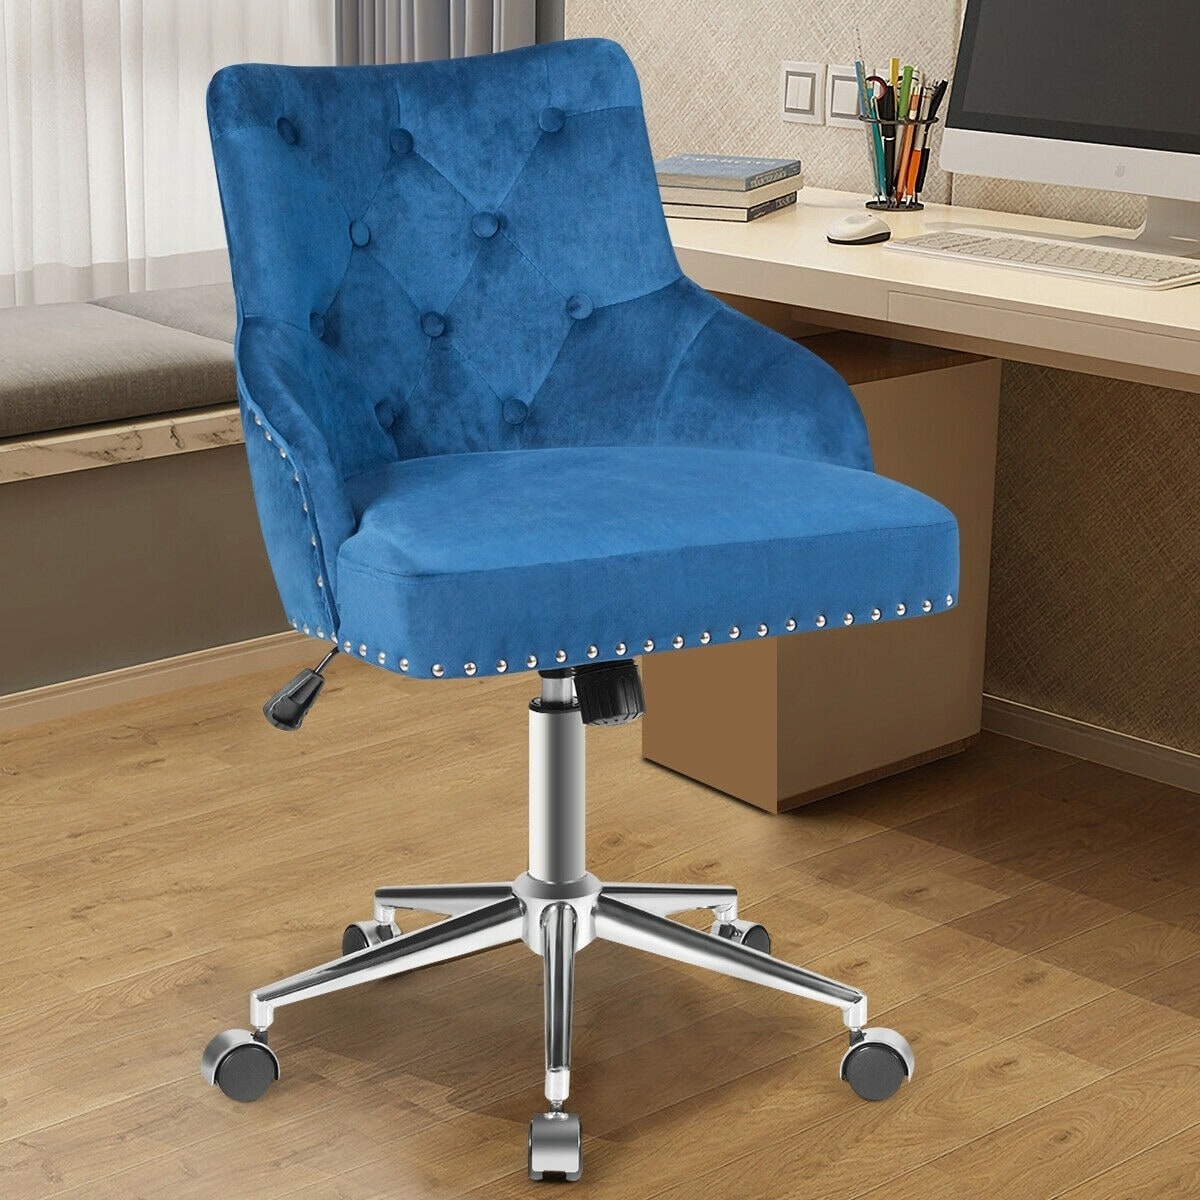 Tufted Upholstered Swivel Computer Desk Chair with Nailed Tri-Blue - Blue